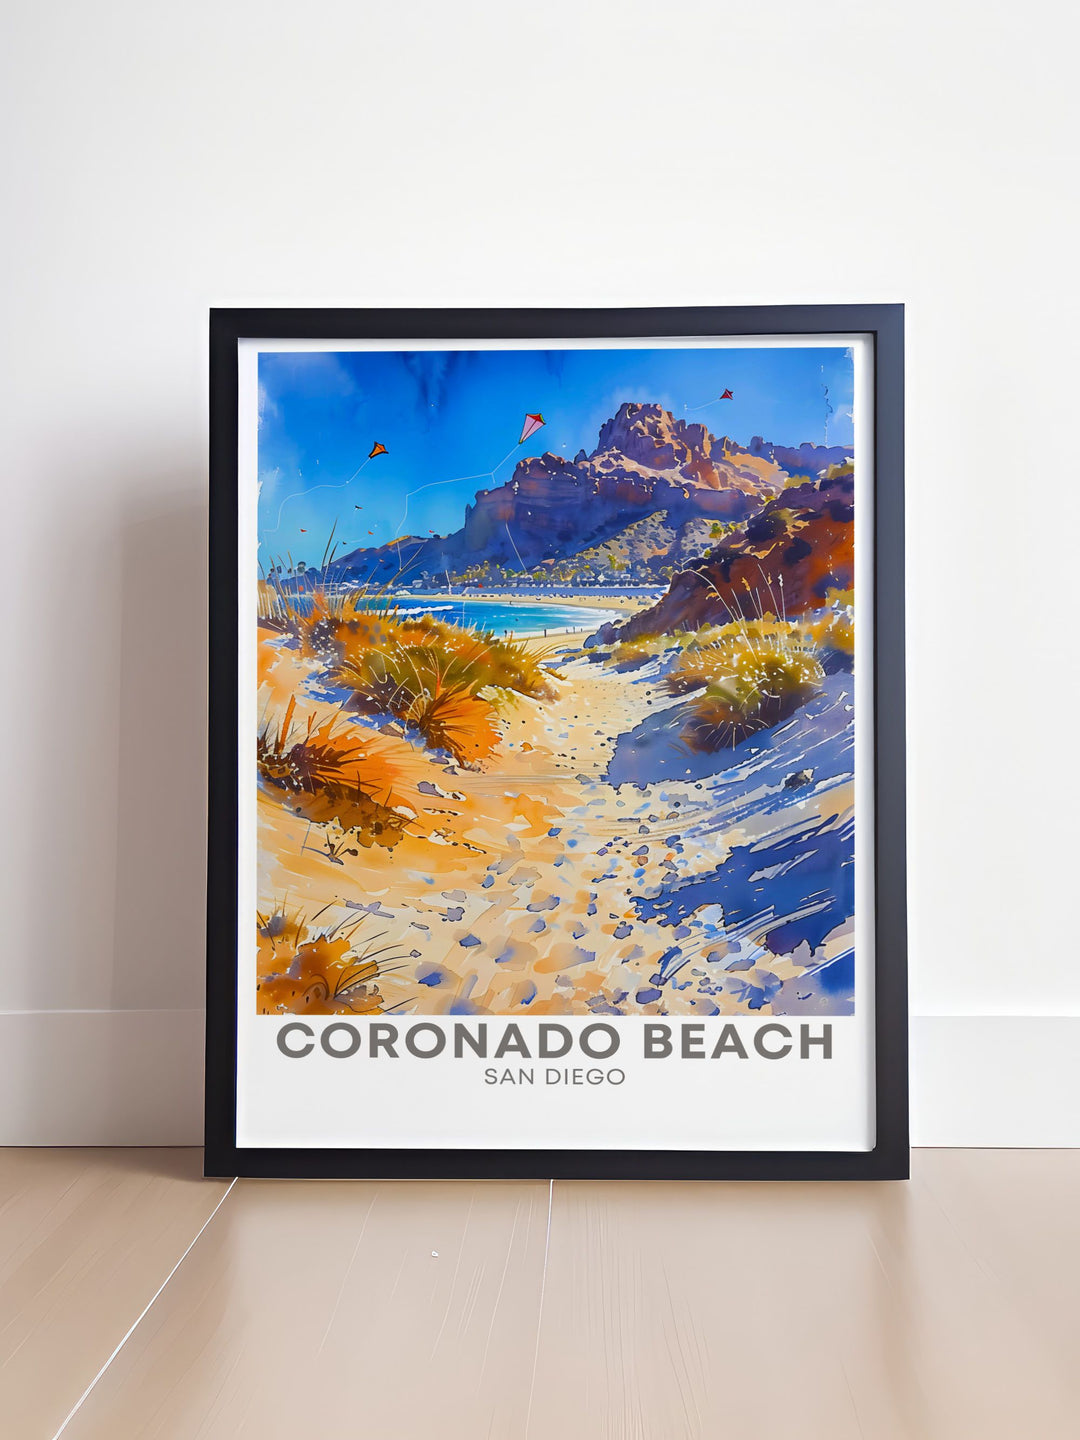 Stunning Coronado Art featuring Vail Ski scenes and Sand Dunes. This Colorado Decor brings the beauty of the Rockies and the serene Sand Dunes into your home with vibrant colors and intricate details perfect for creating a captivating visual experience.